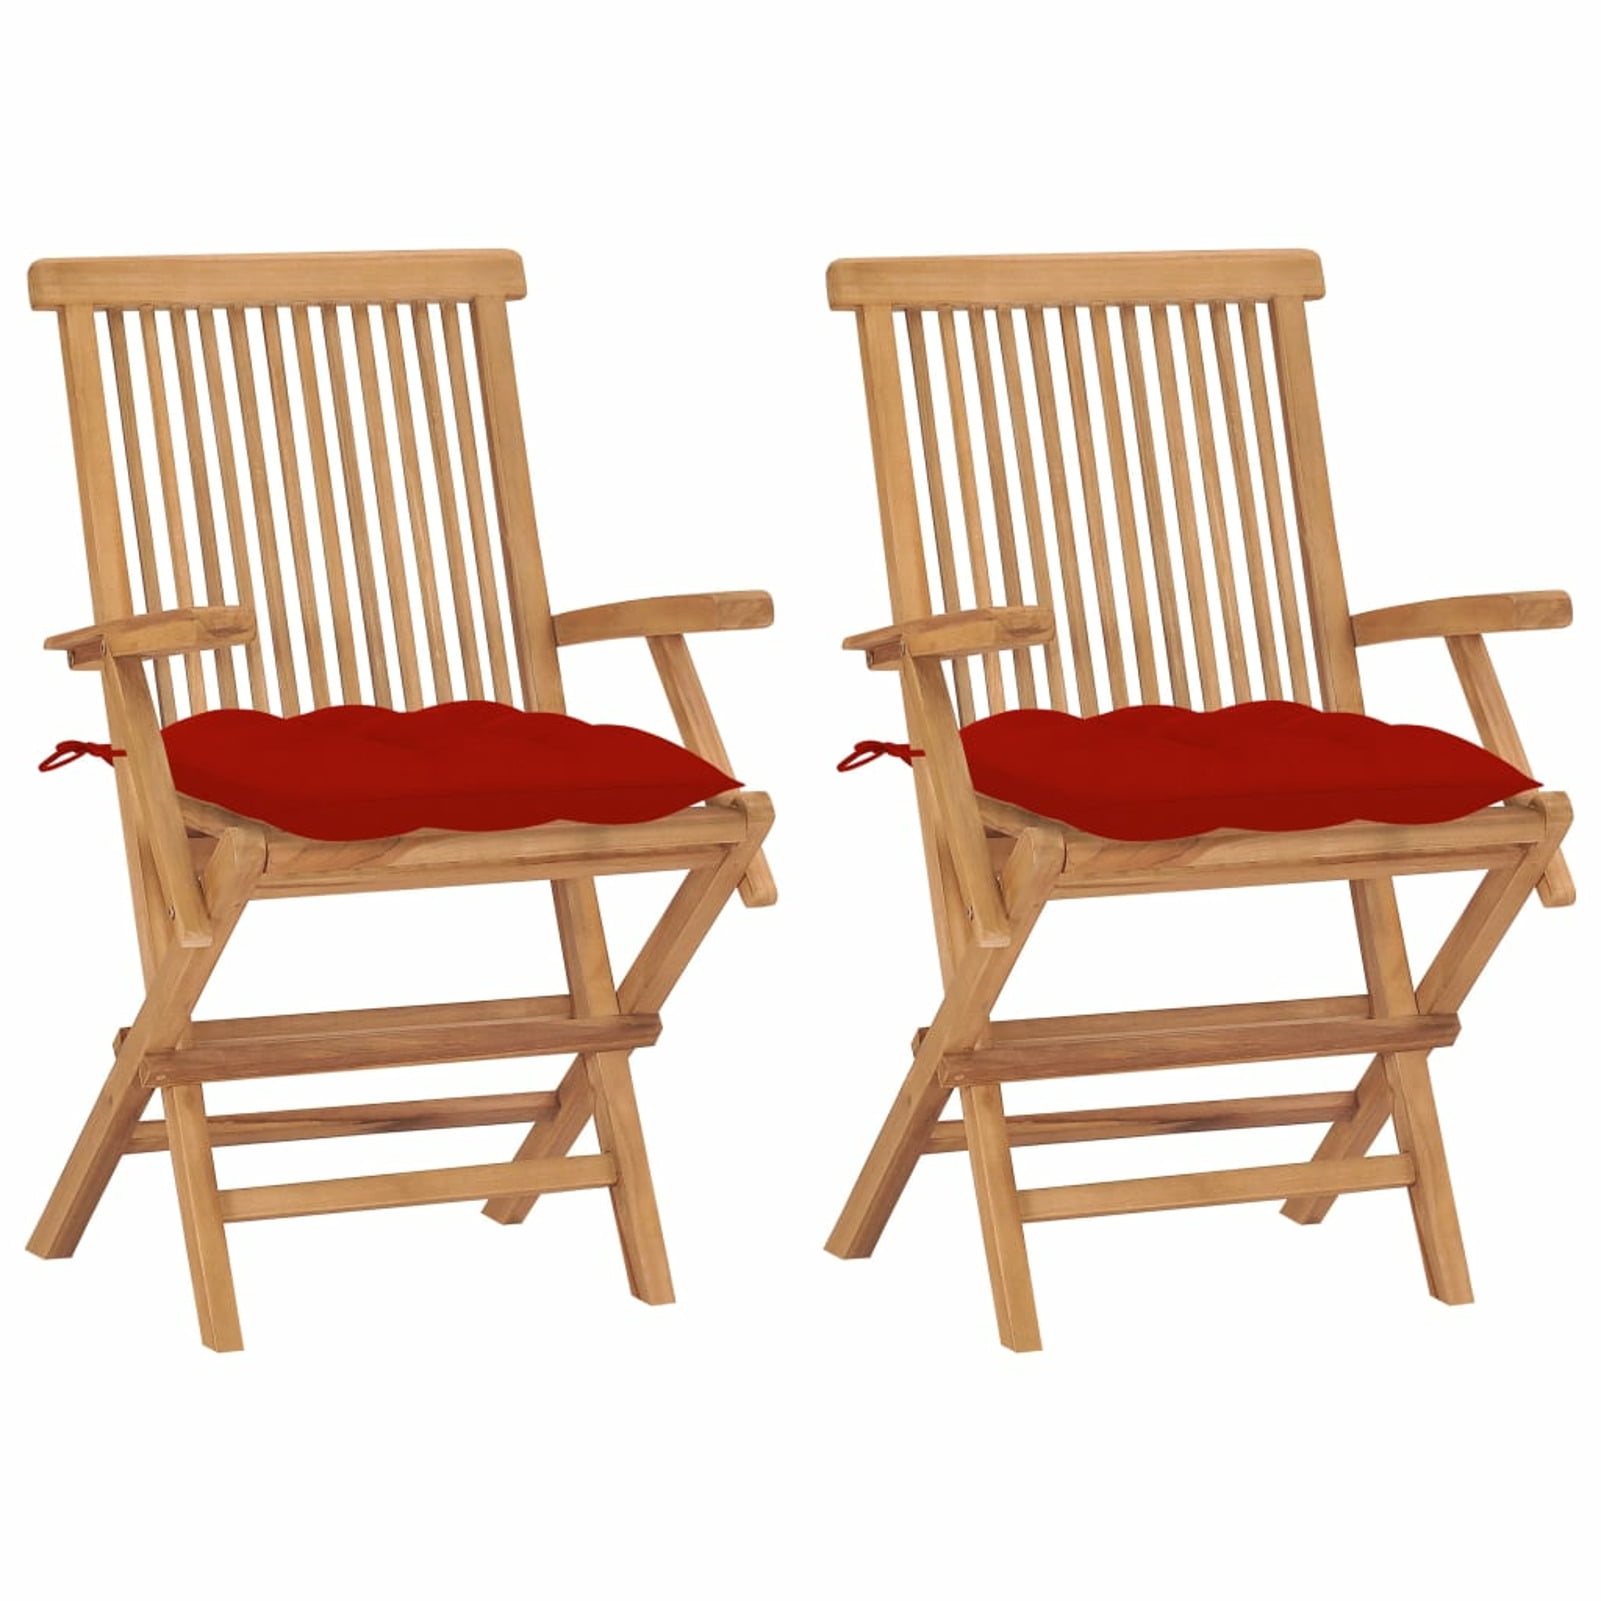 Details about   2 Wooden Patio Chairs and Table Set Recliner Foldable Lounge Wood Furniture 